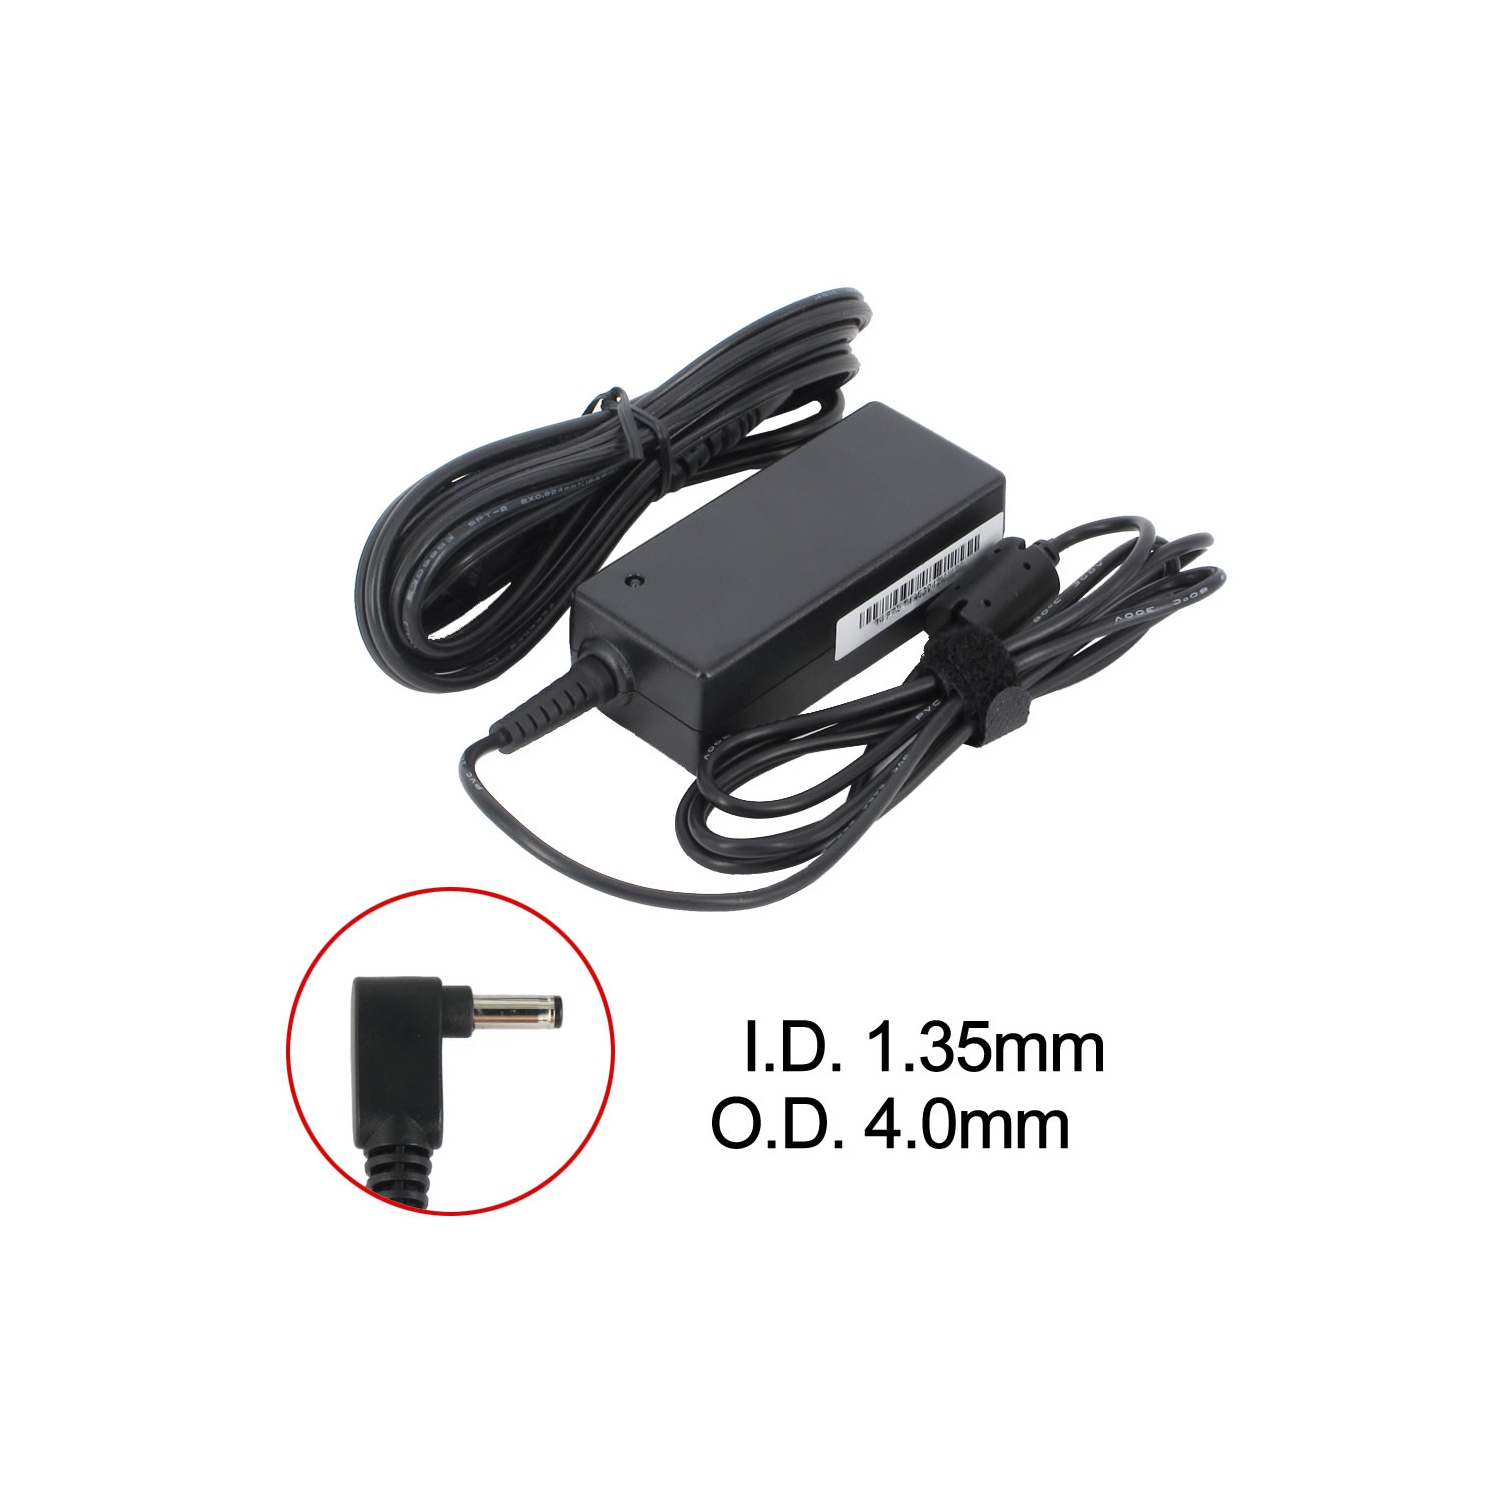 BattDepot: New Laptop AC Adapter for Asus UX305UA-1D, 0A001-00230300, 0A001-00233100, EXA1206CH, W15-065N1A